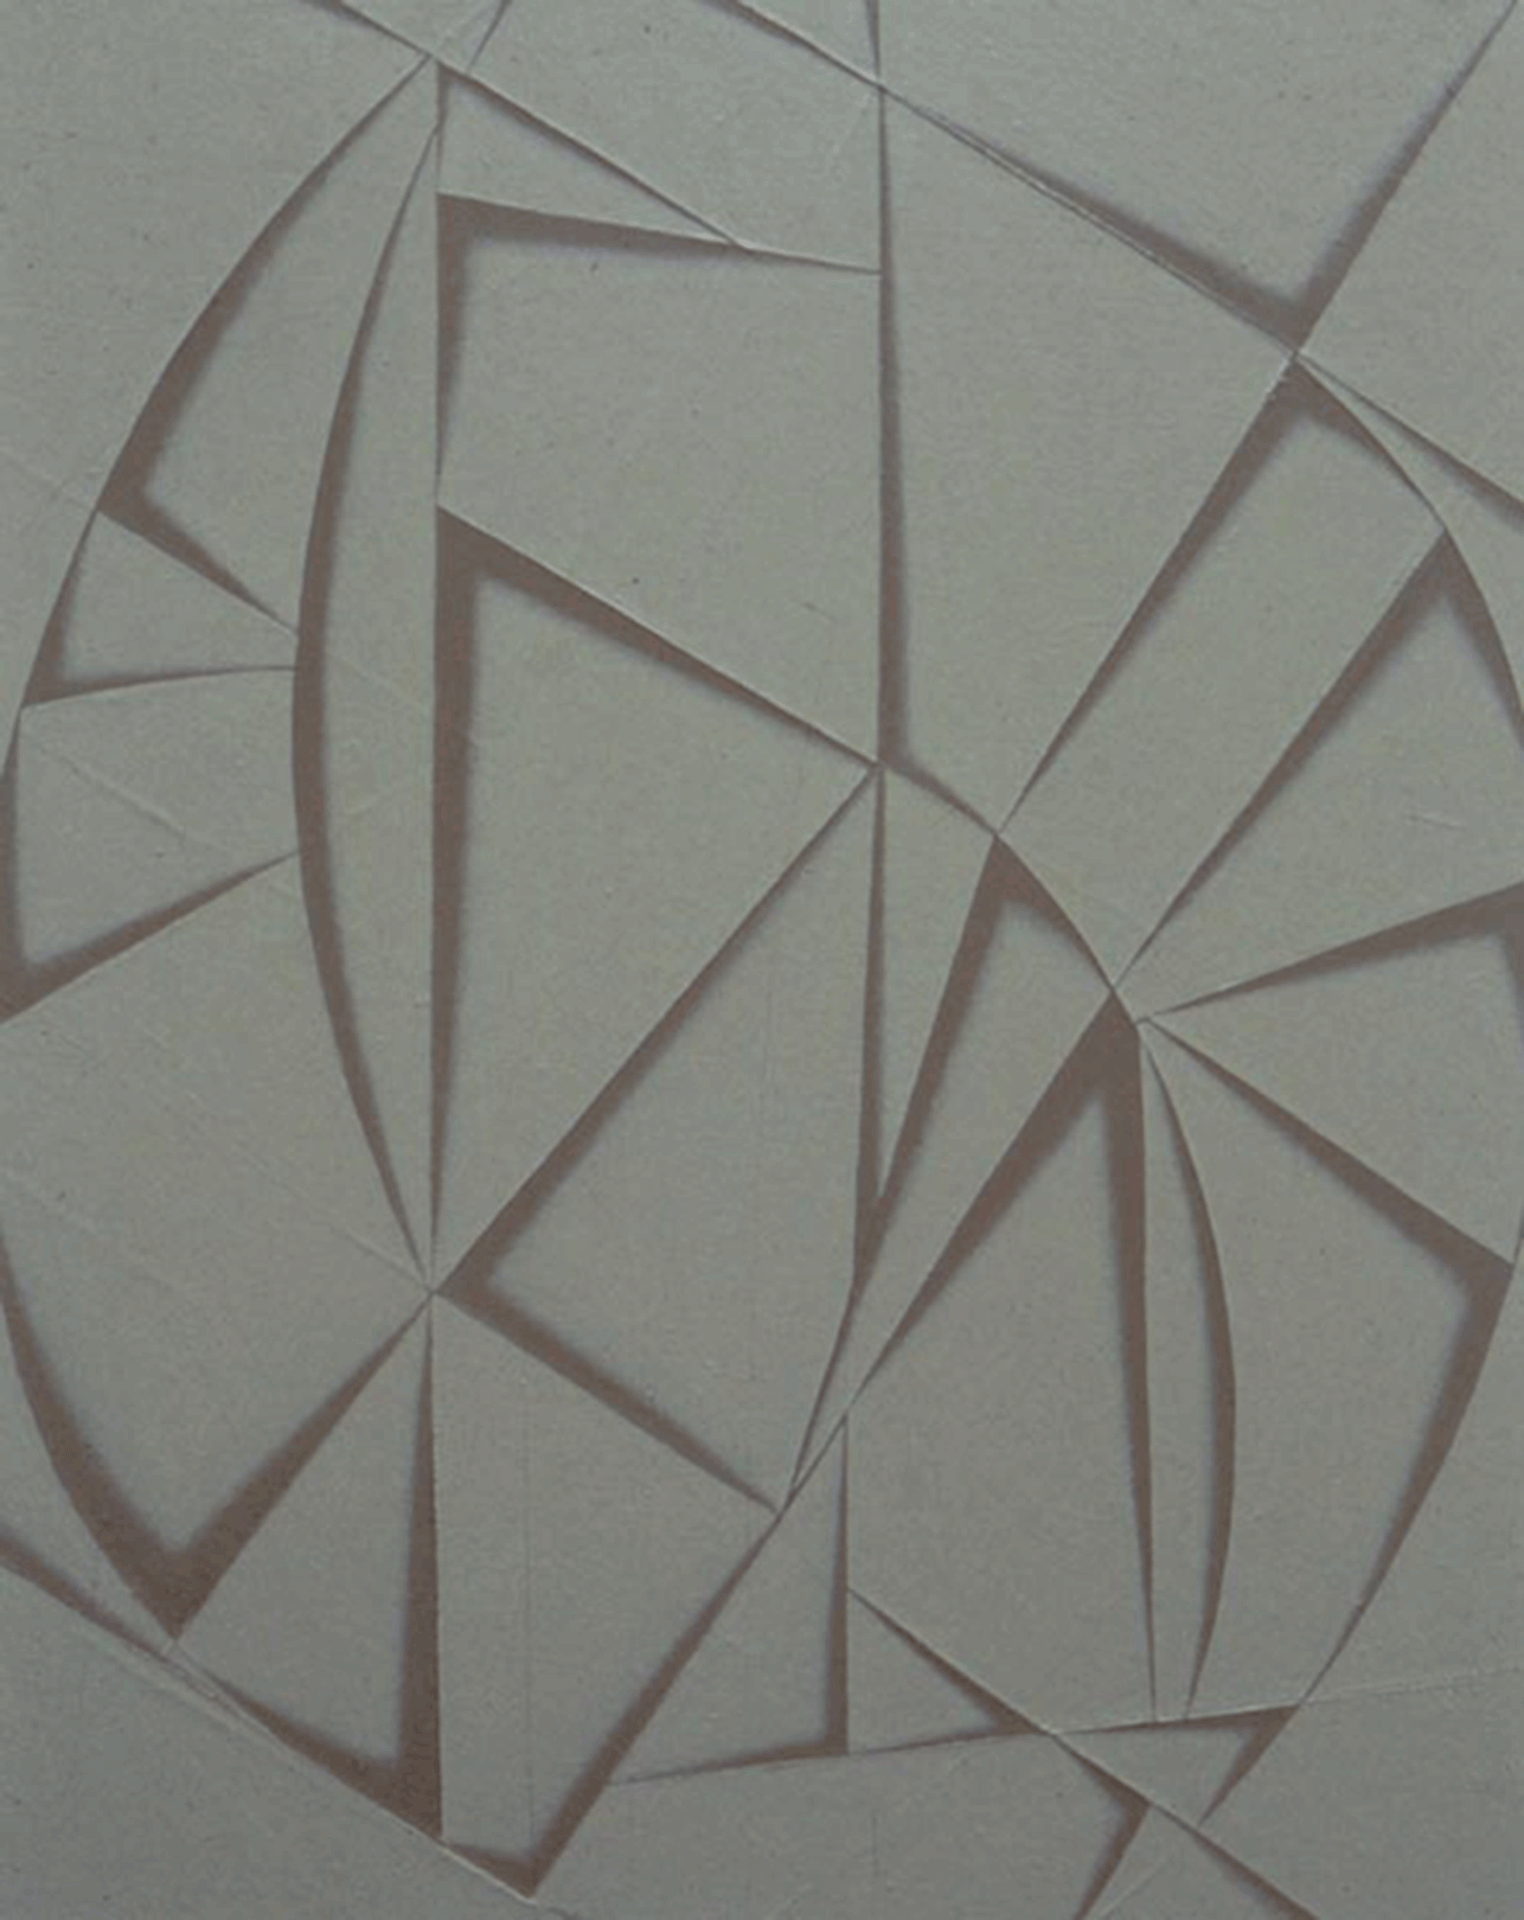 A painting by Tomma Abts, titled Epko, dated 2001.